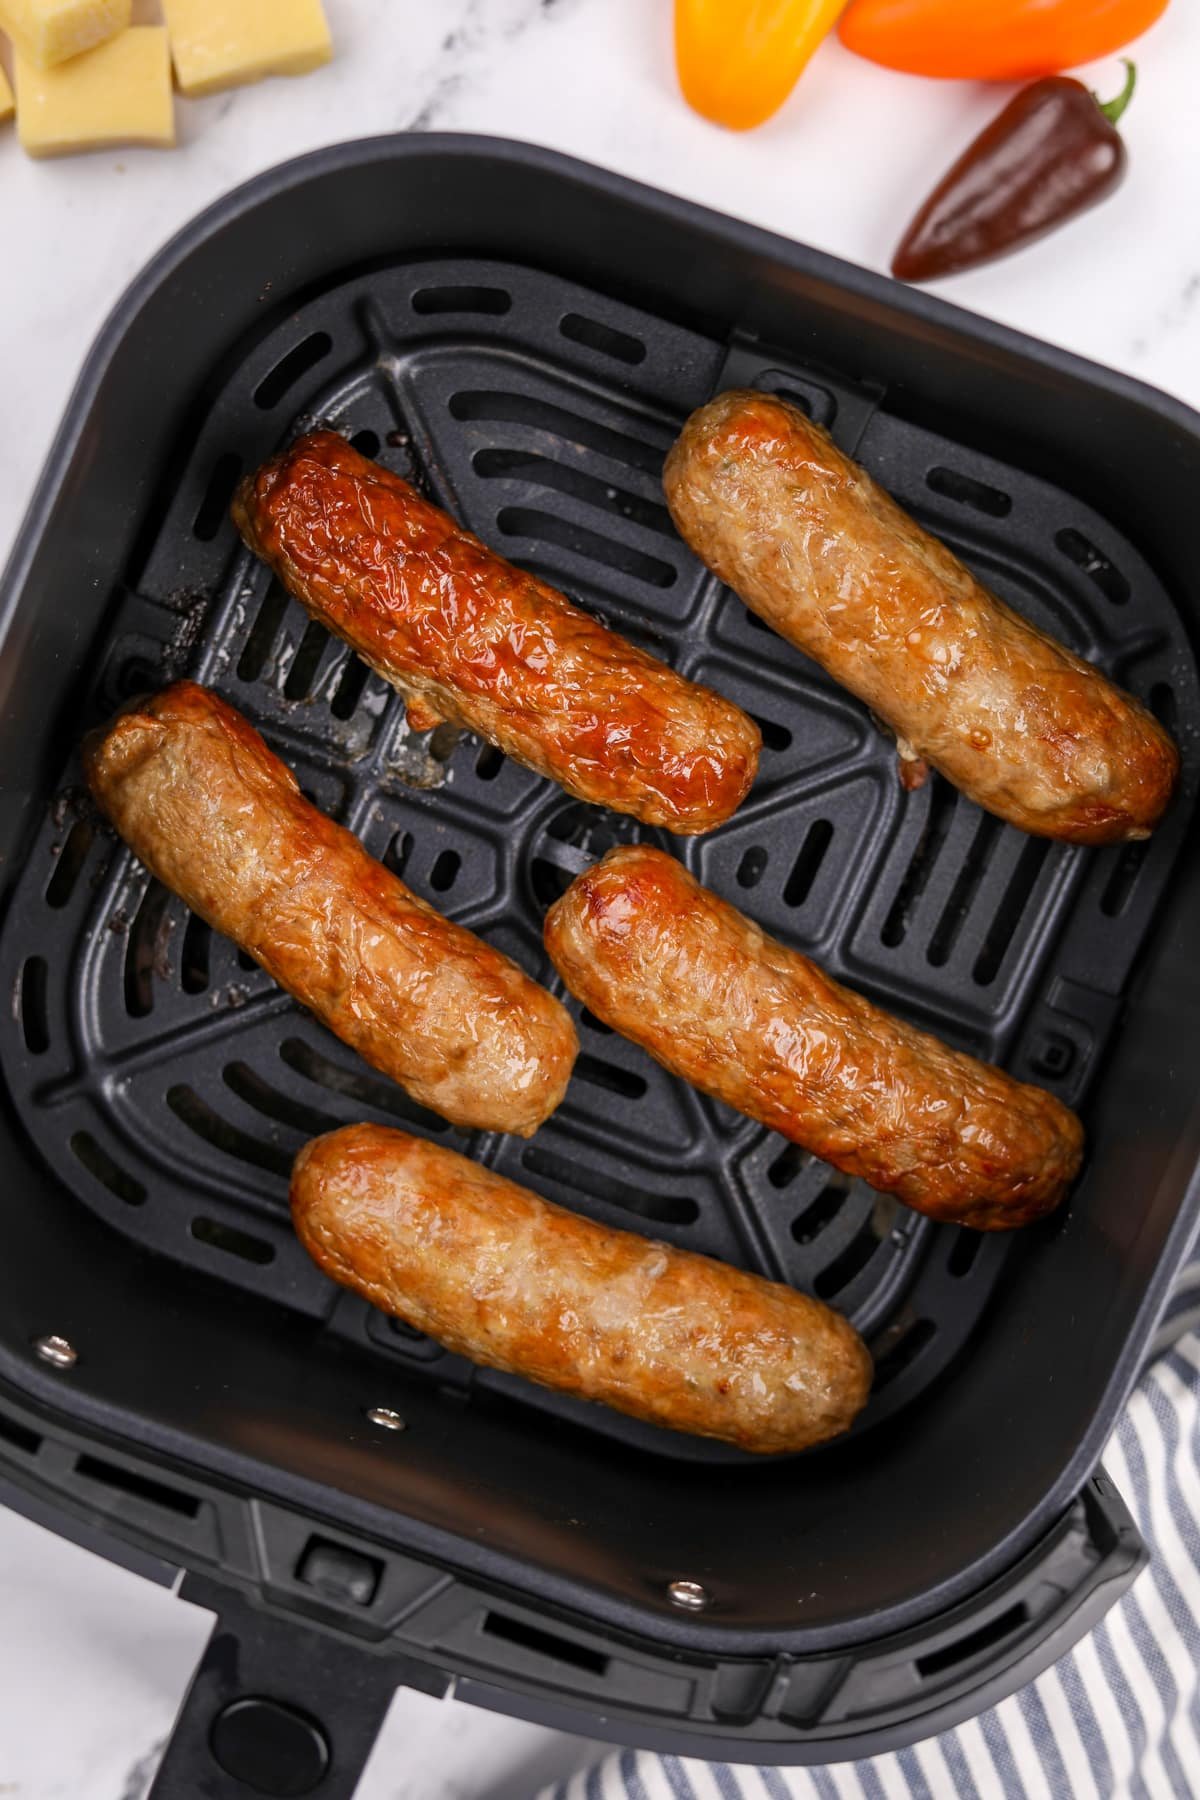 An air fryer basket with cooked sausages inside.